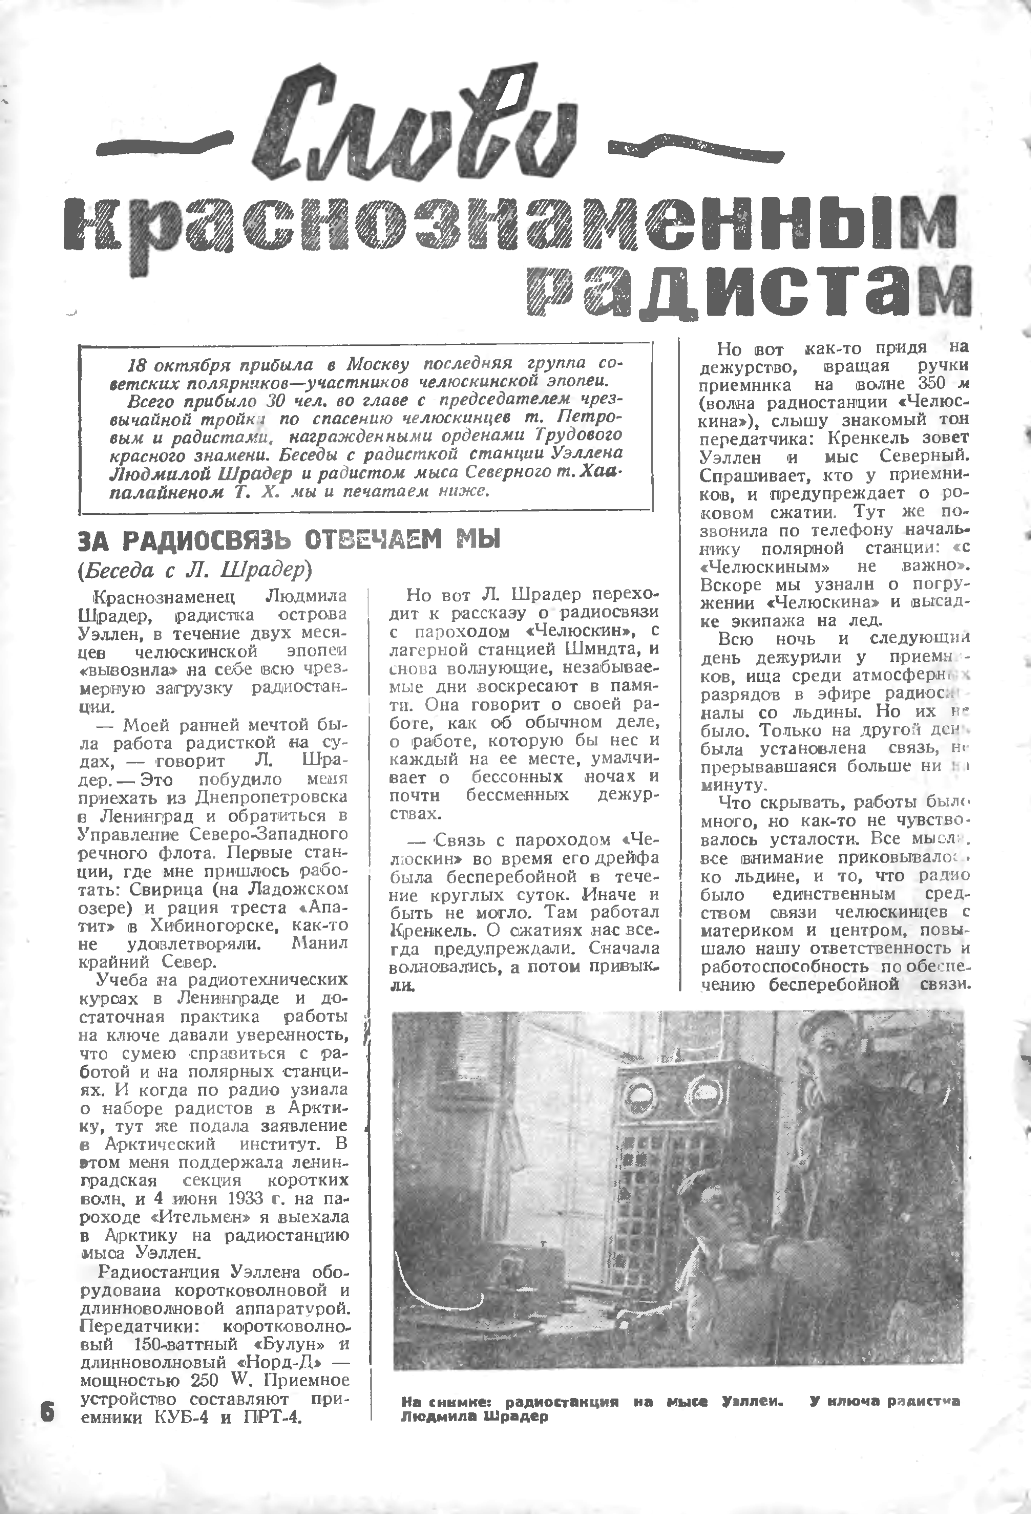 Радиофронт 1934 г. №22.png